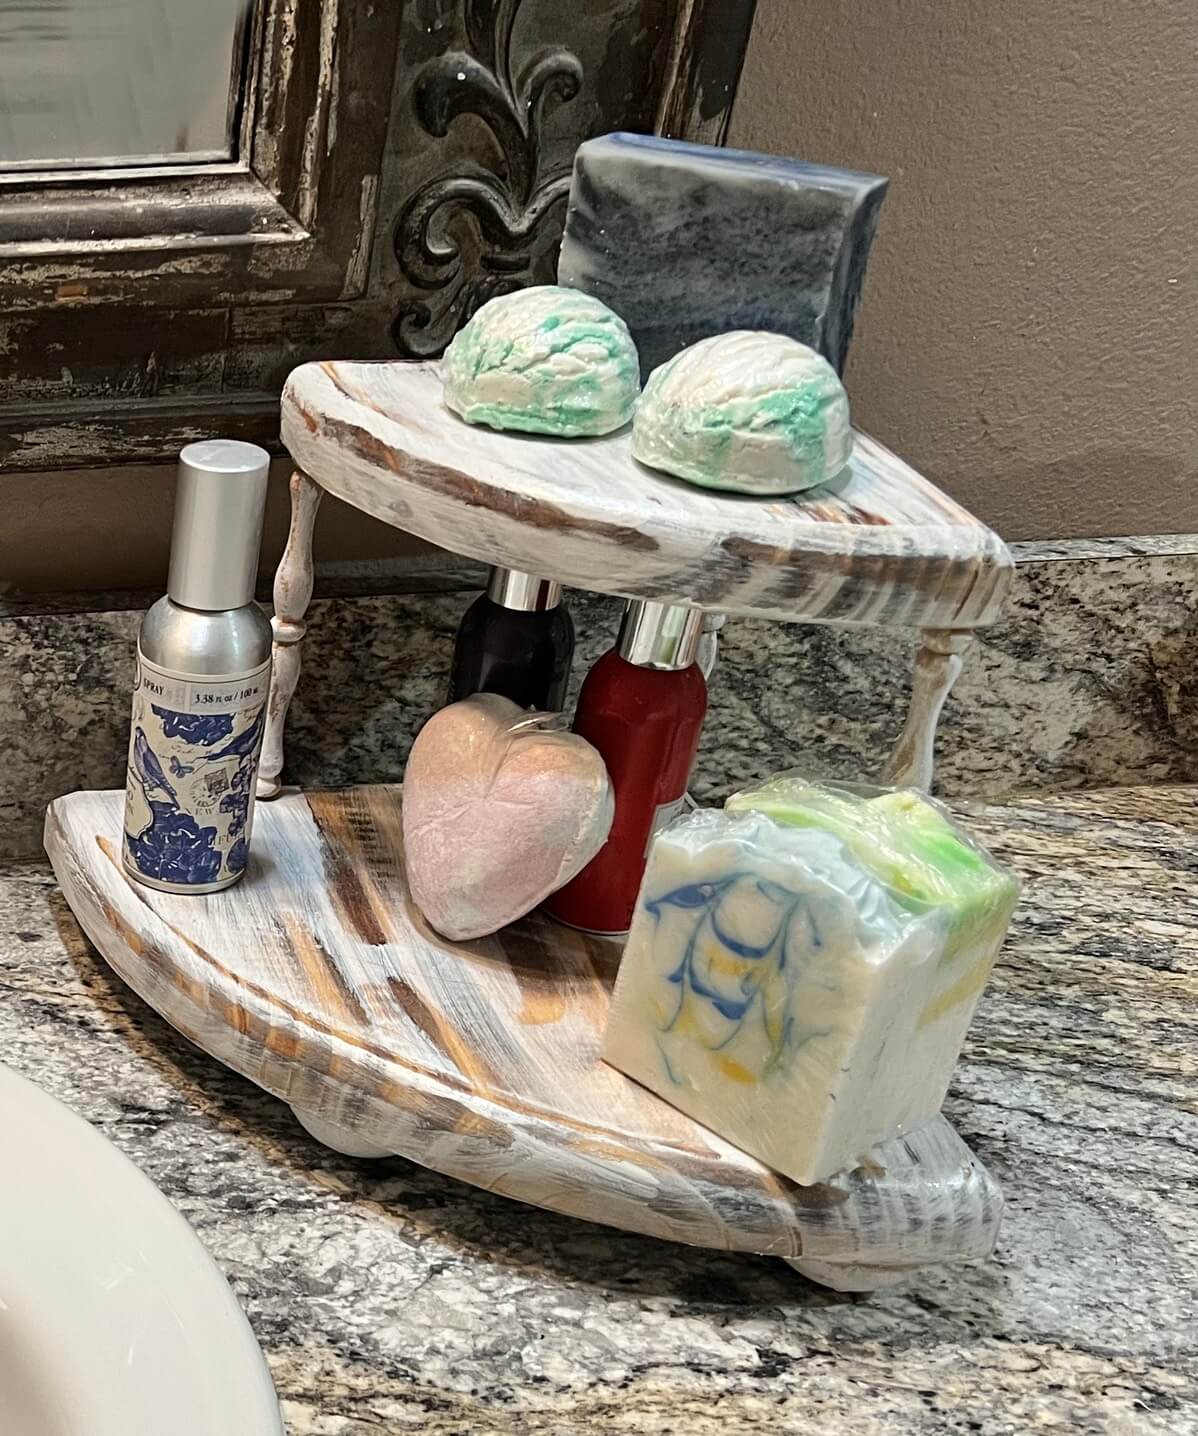 Boho wooden Riser shown here on the right side of sink on bathroom countertop. works great for displaying perfumes or bath bomb display.